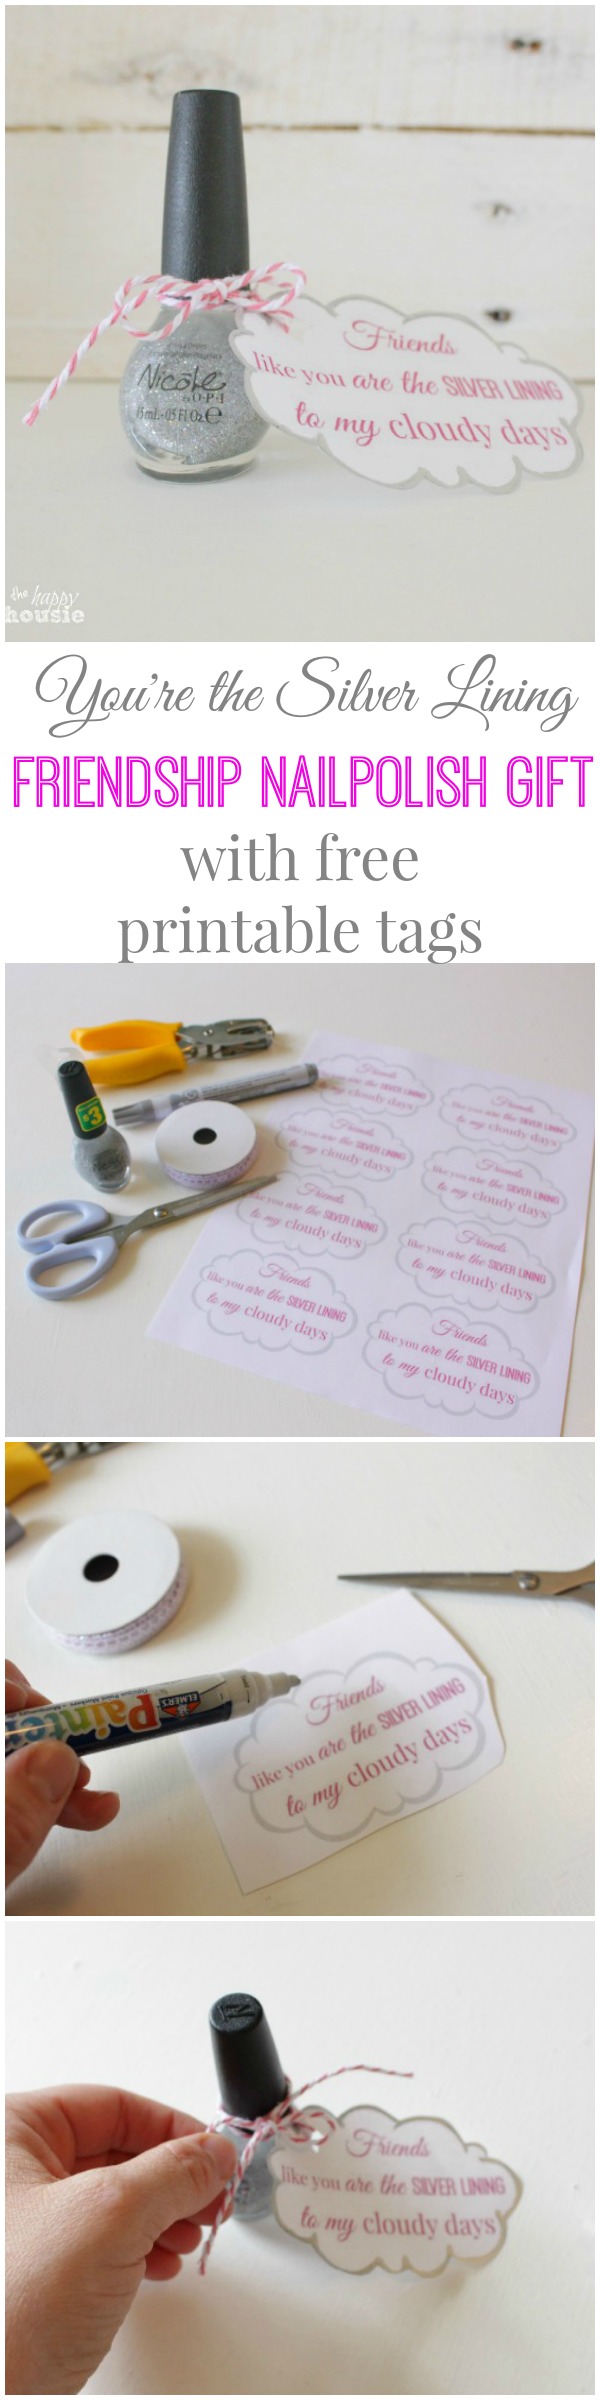 You're the Silver Lining Friendship Nailpolish Gift with free printable tags collage by The Happy Housie